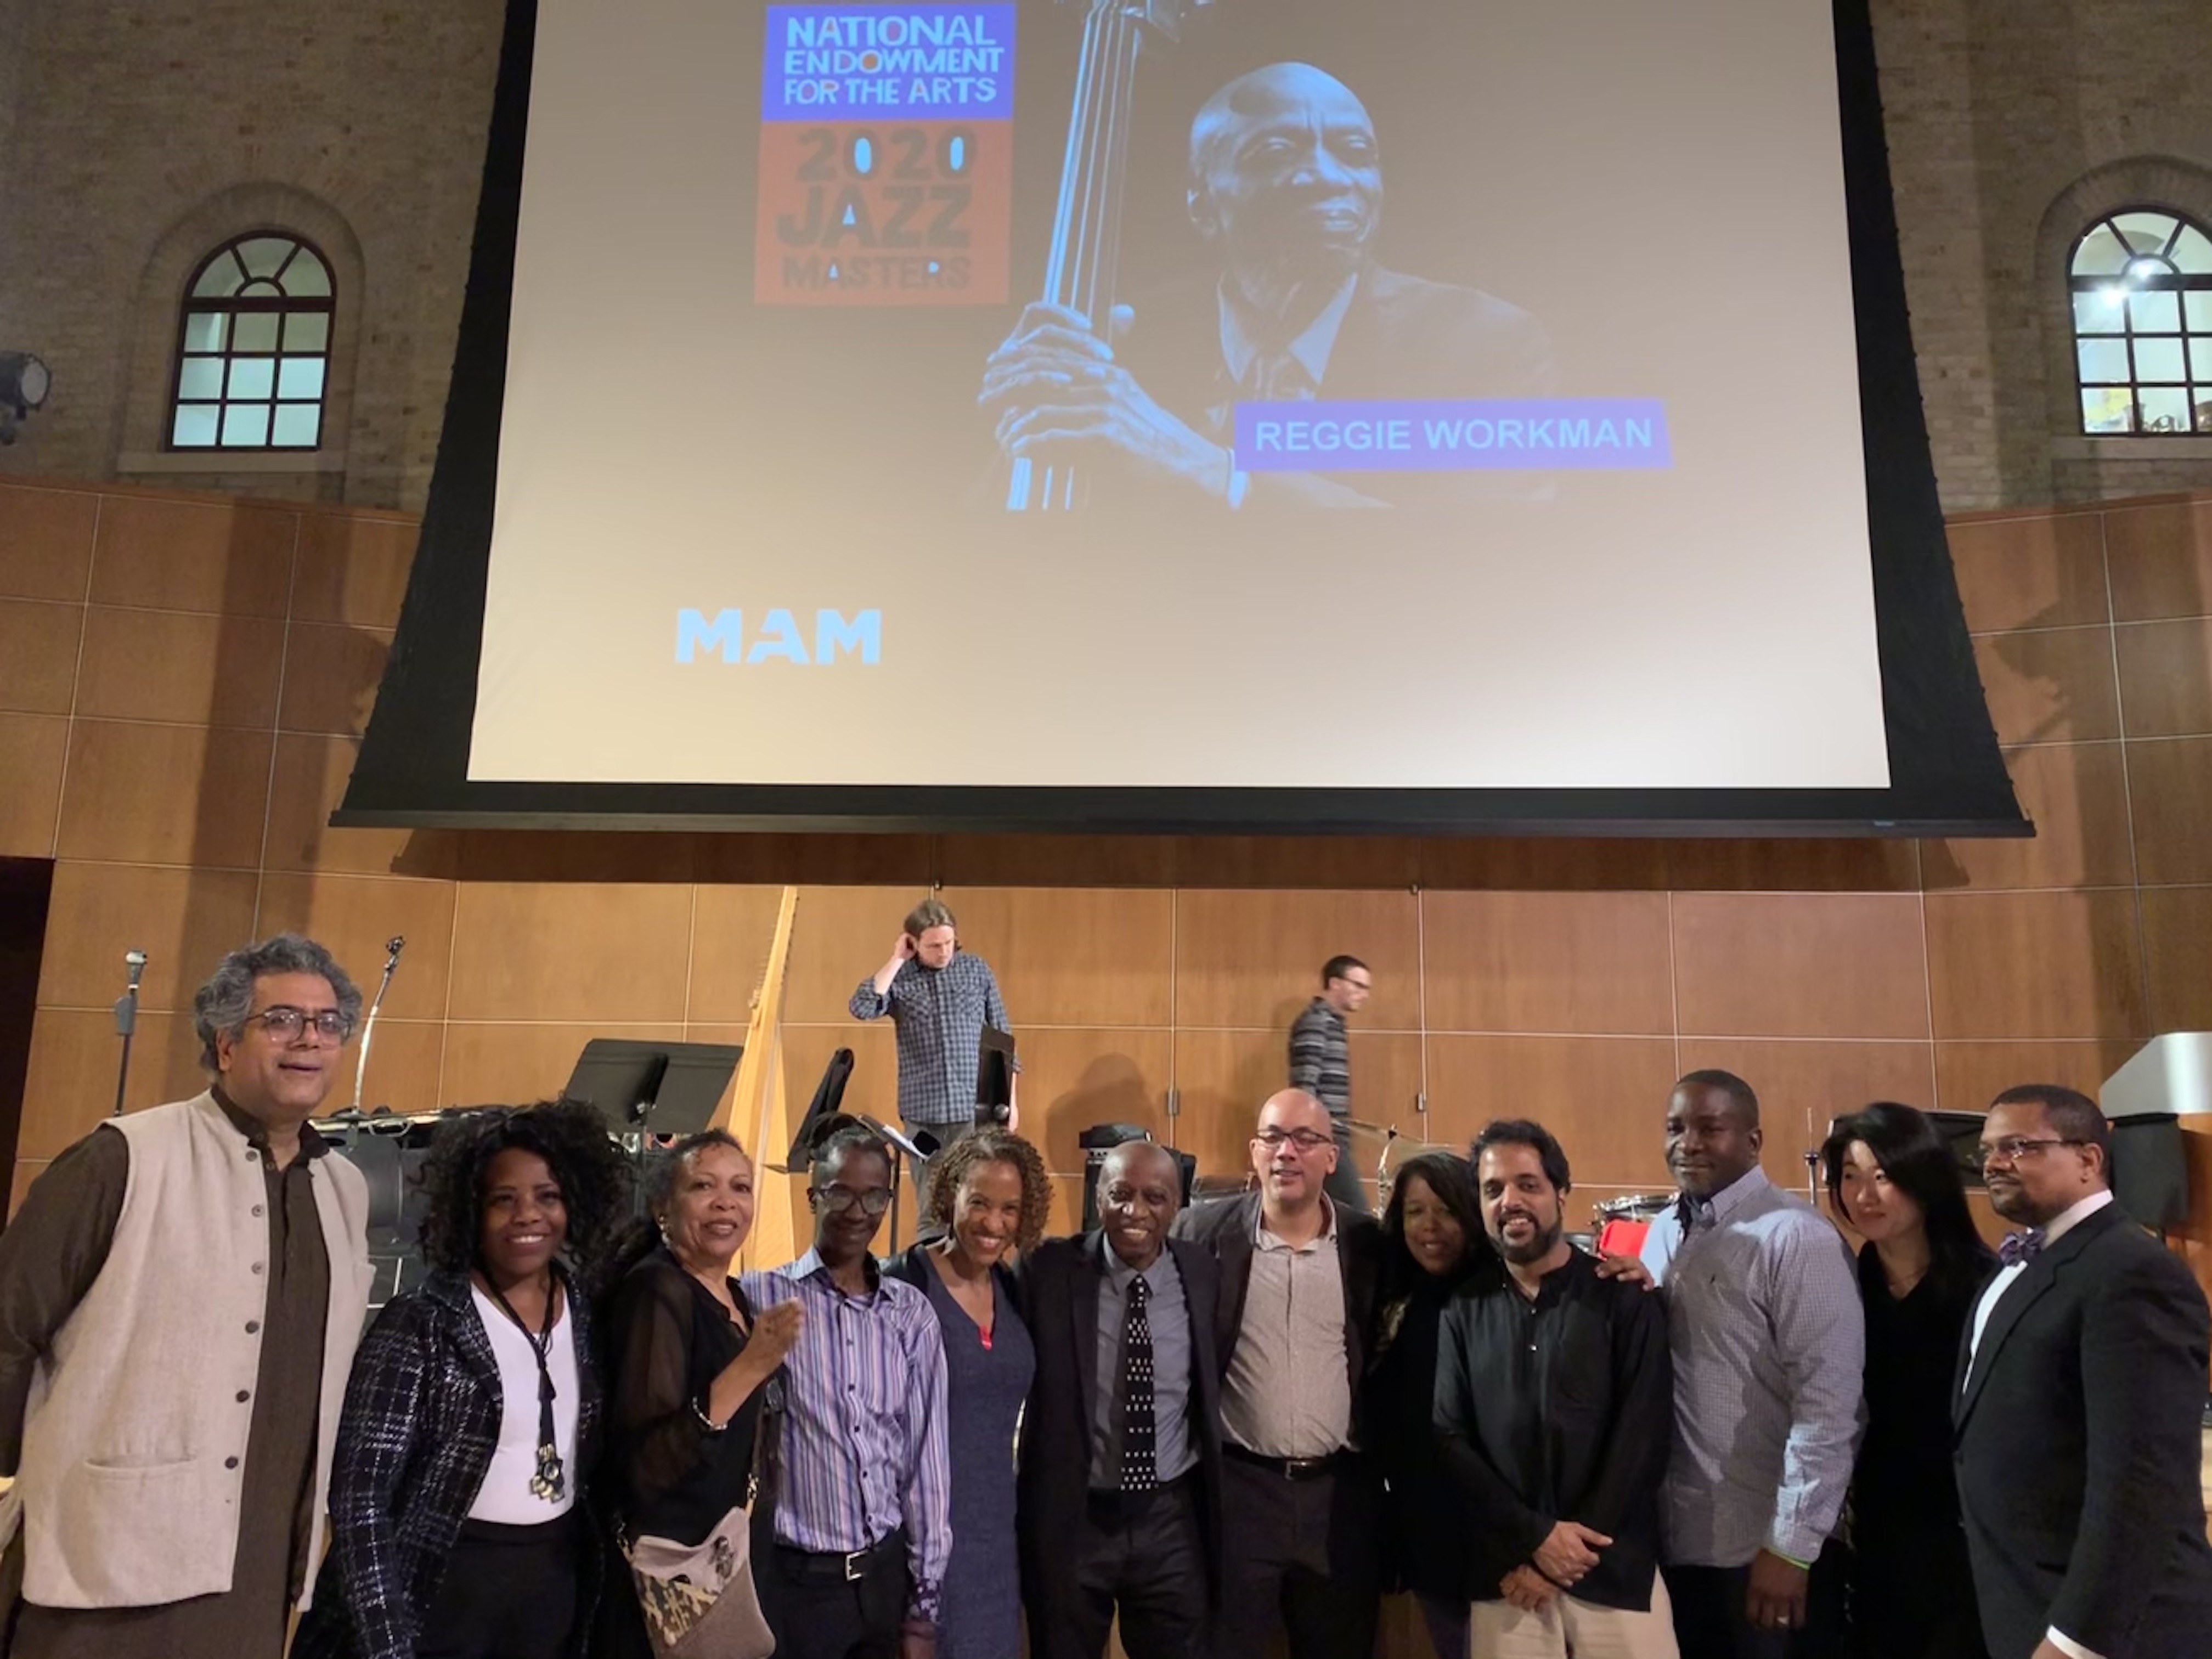 AACC and band members at the Reggie Workman event in 2020.